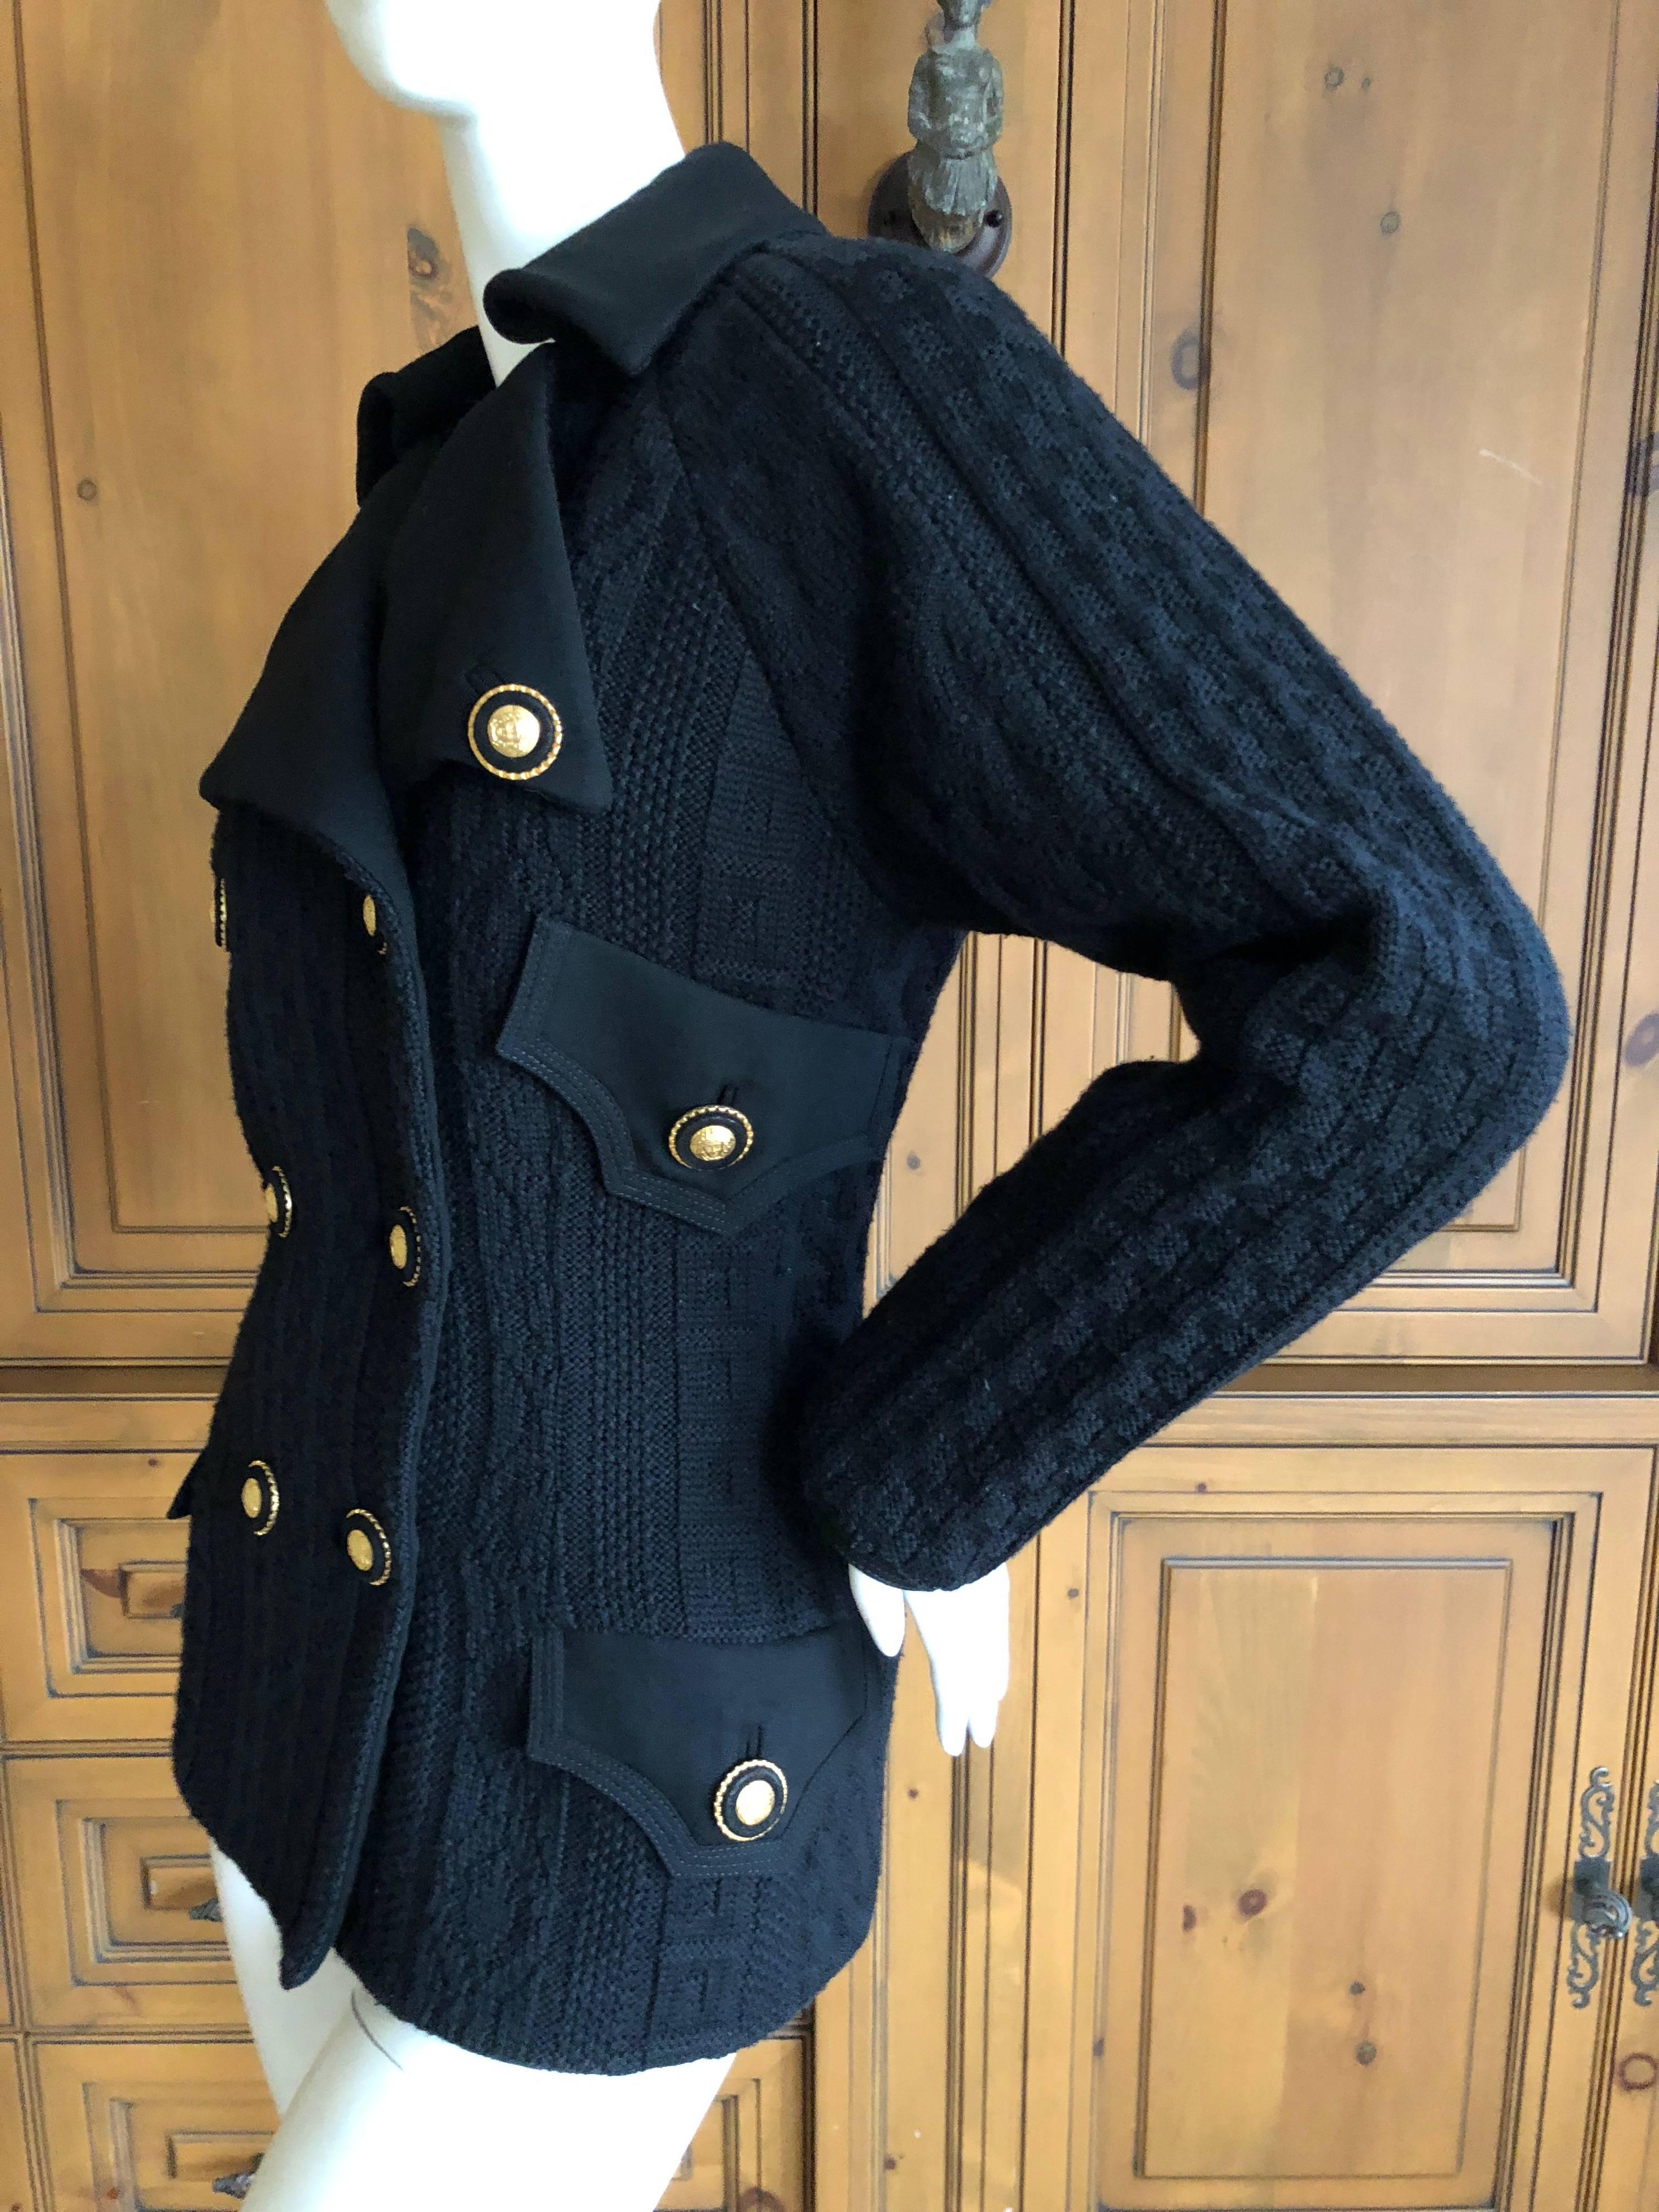 Gianni Versace Couture 1980's Black Knit Jacket with Medusa Buttons 4